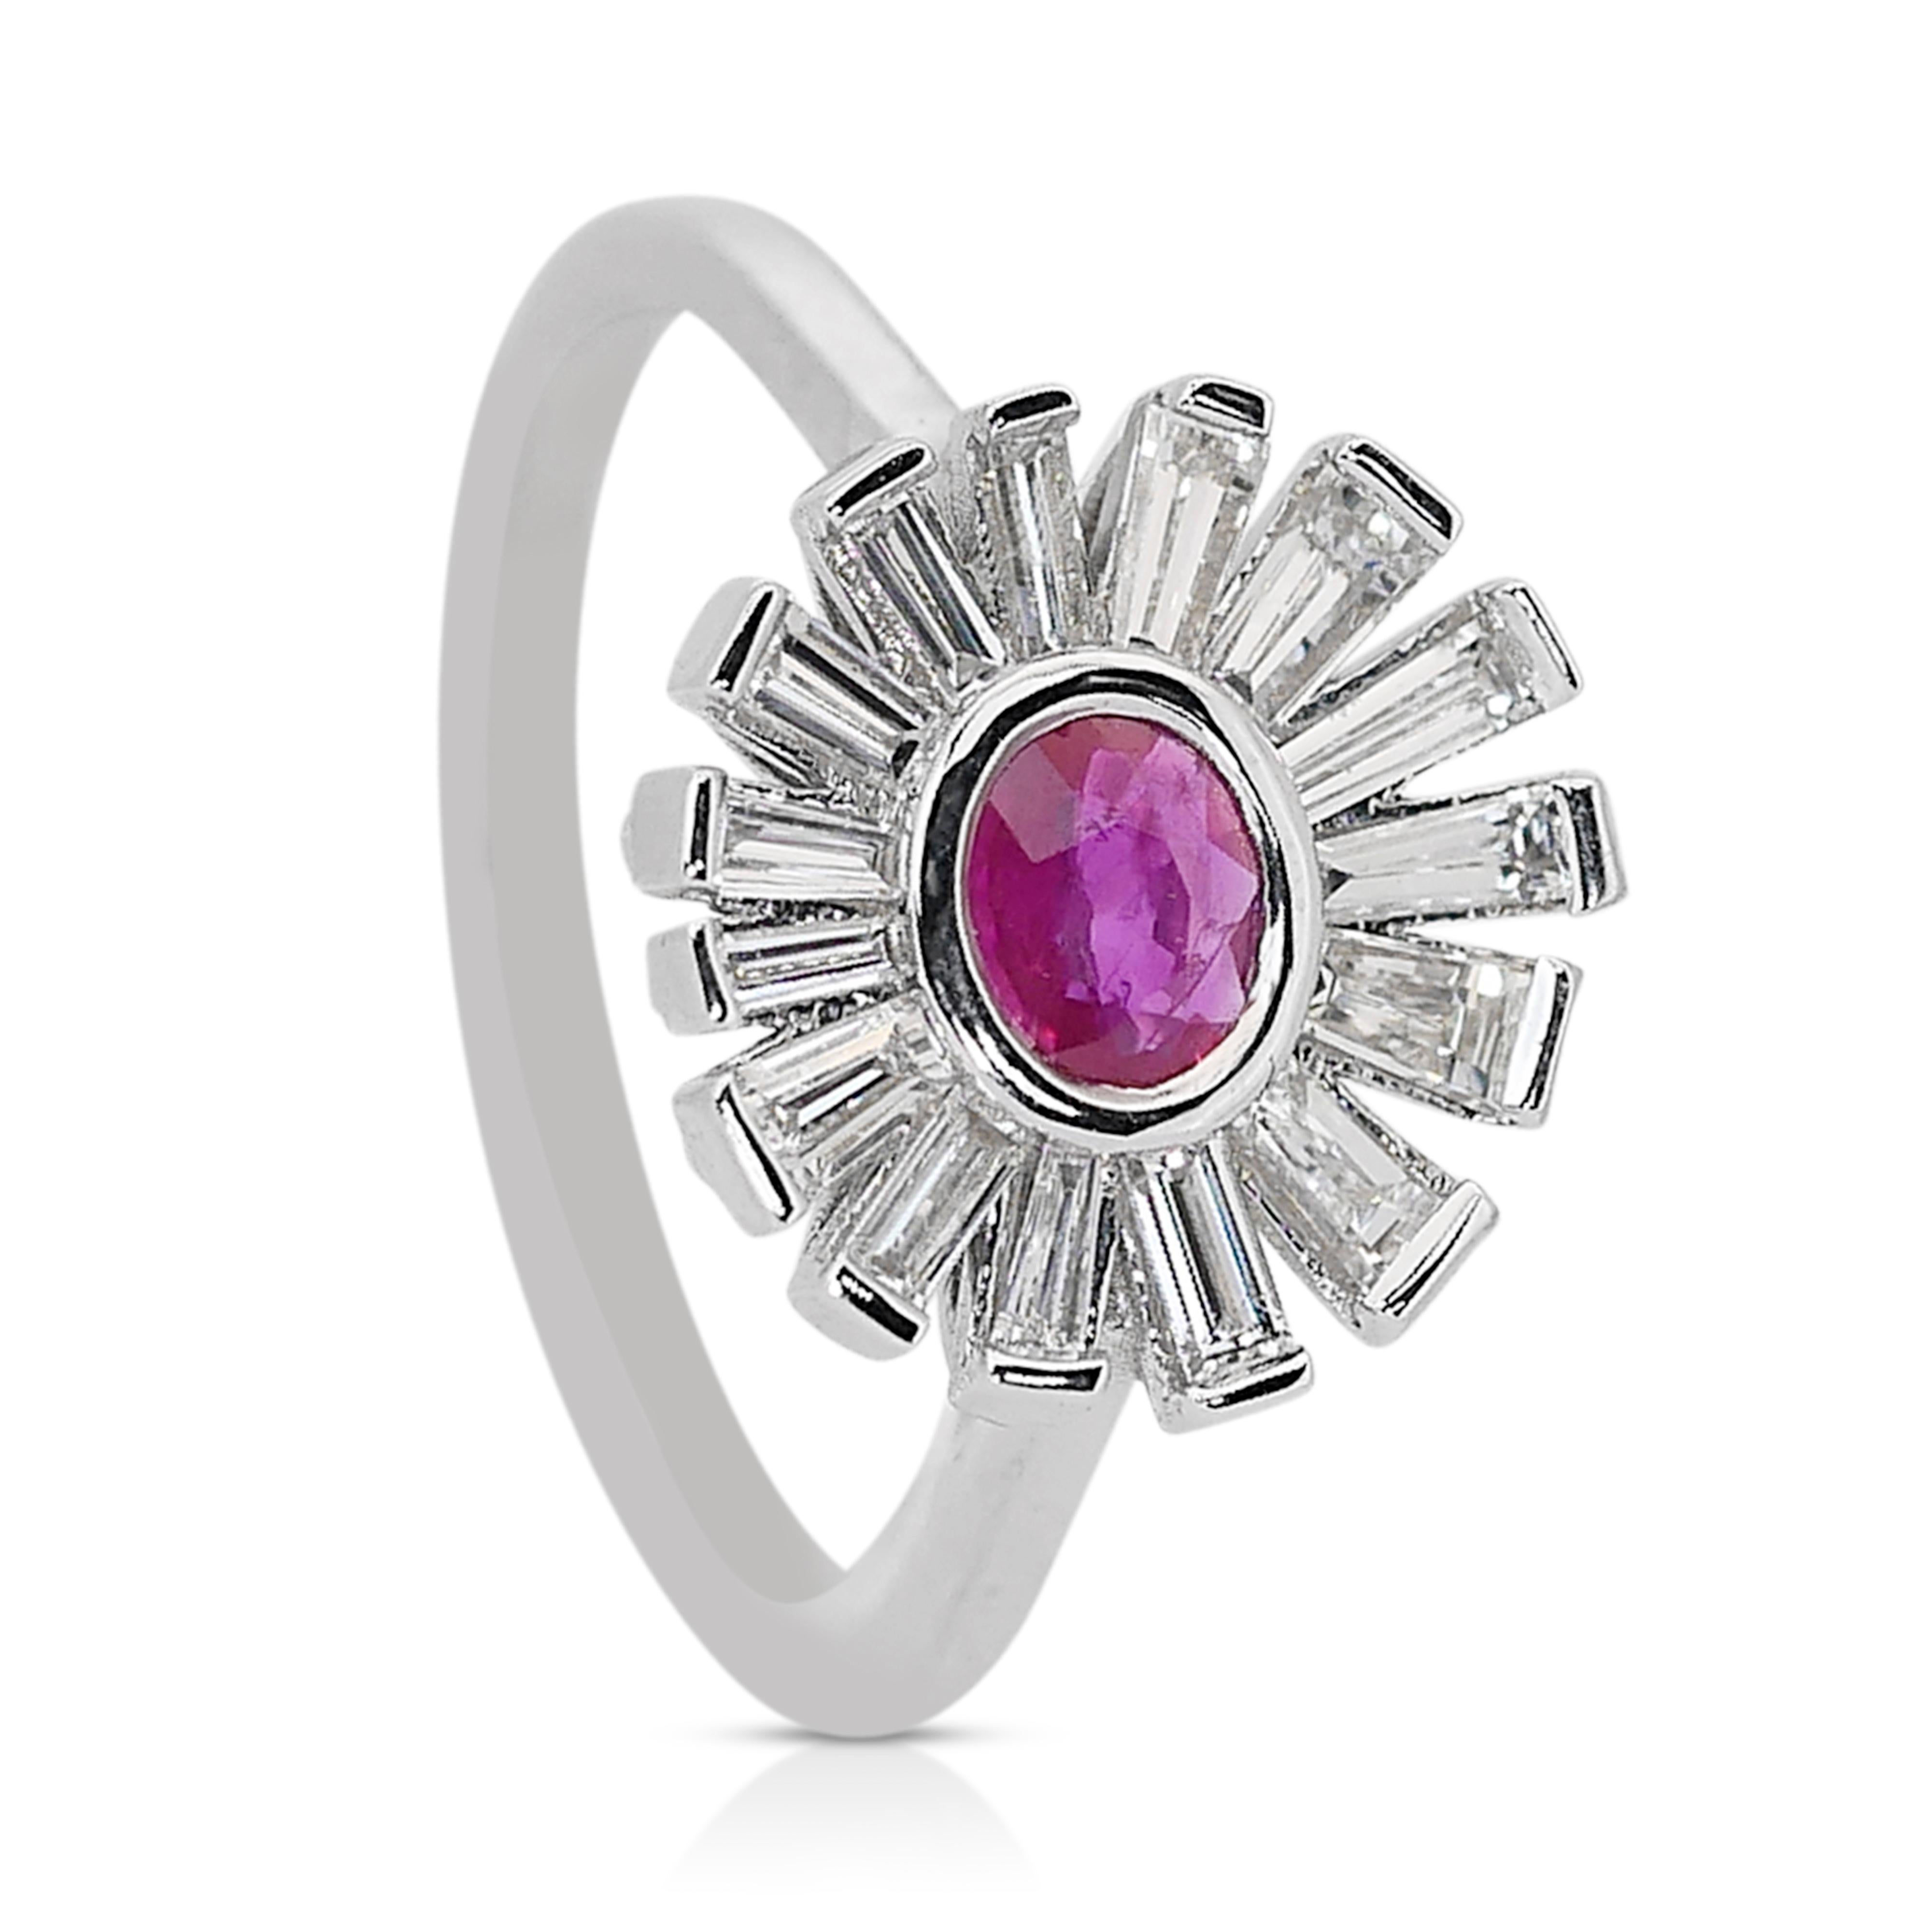 Stunning 1.20ct Ruby and Diamonds Halo Ring in 18k White Gold - IGI Certified In New Condition For Sale In רמת גן, IL